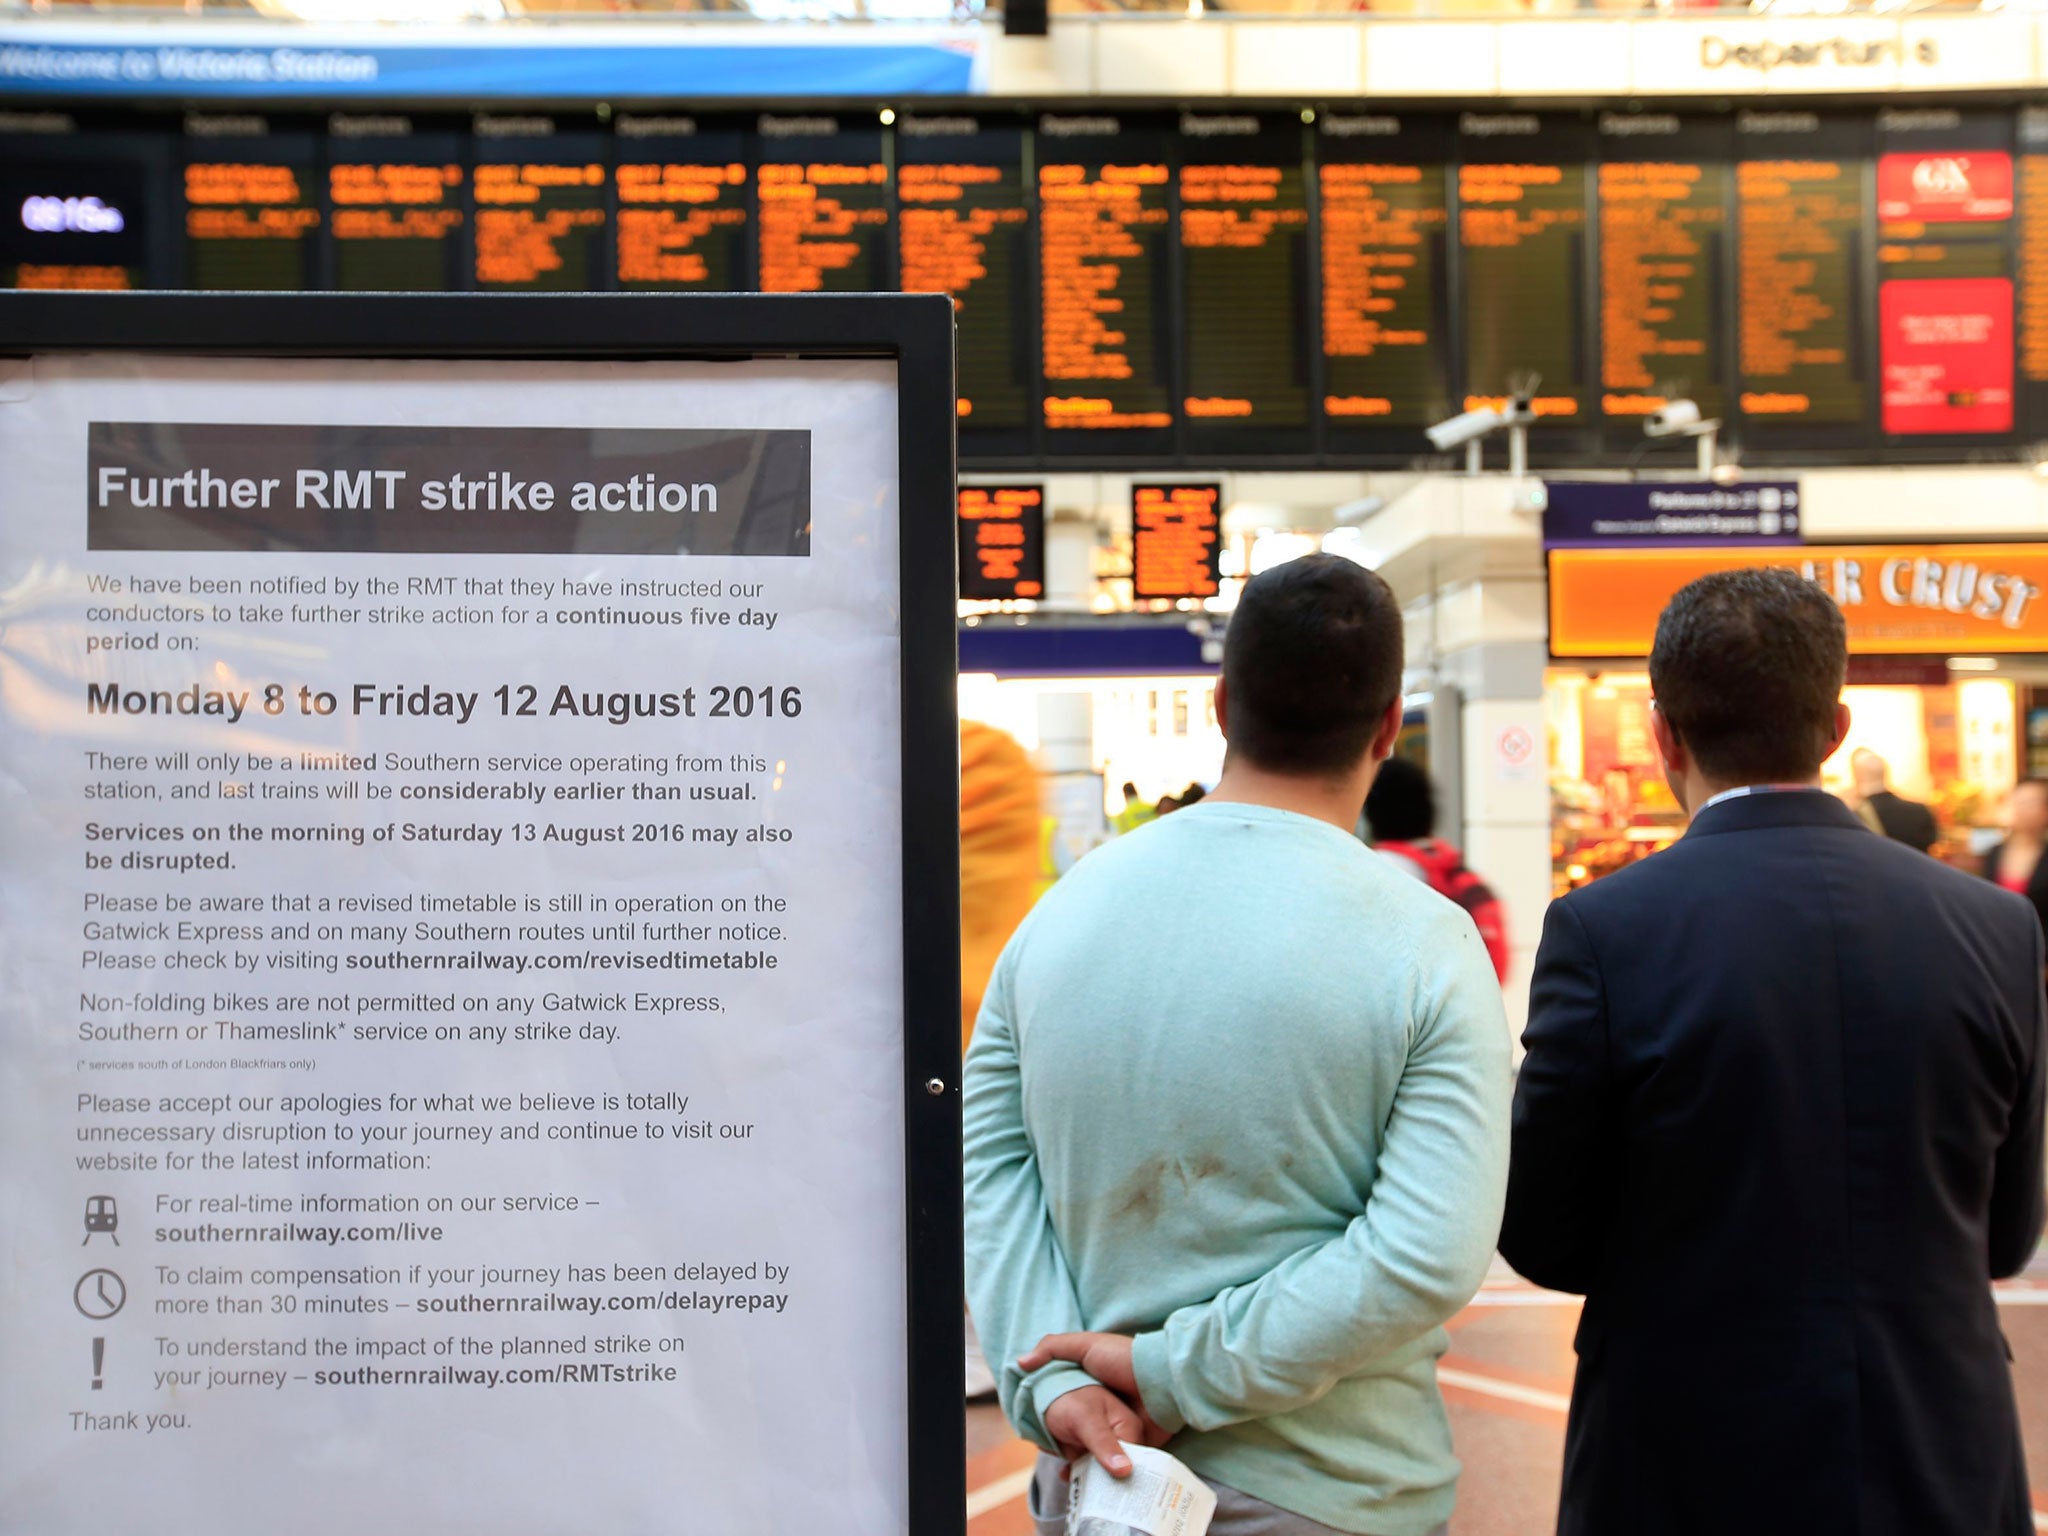 The bitter dispute between Southern and the RMT union has caused frequent cancellations